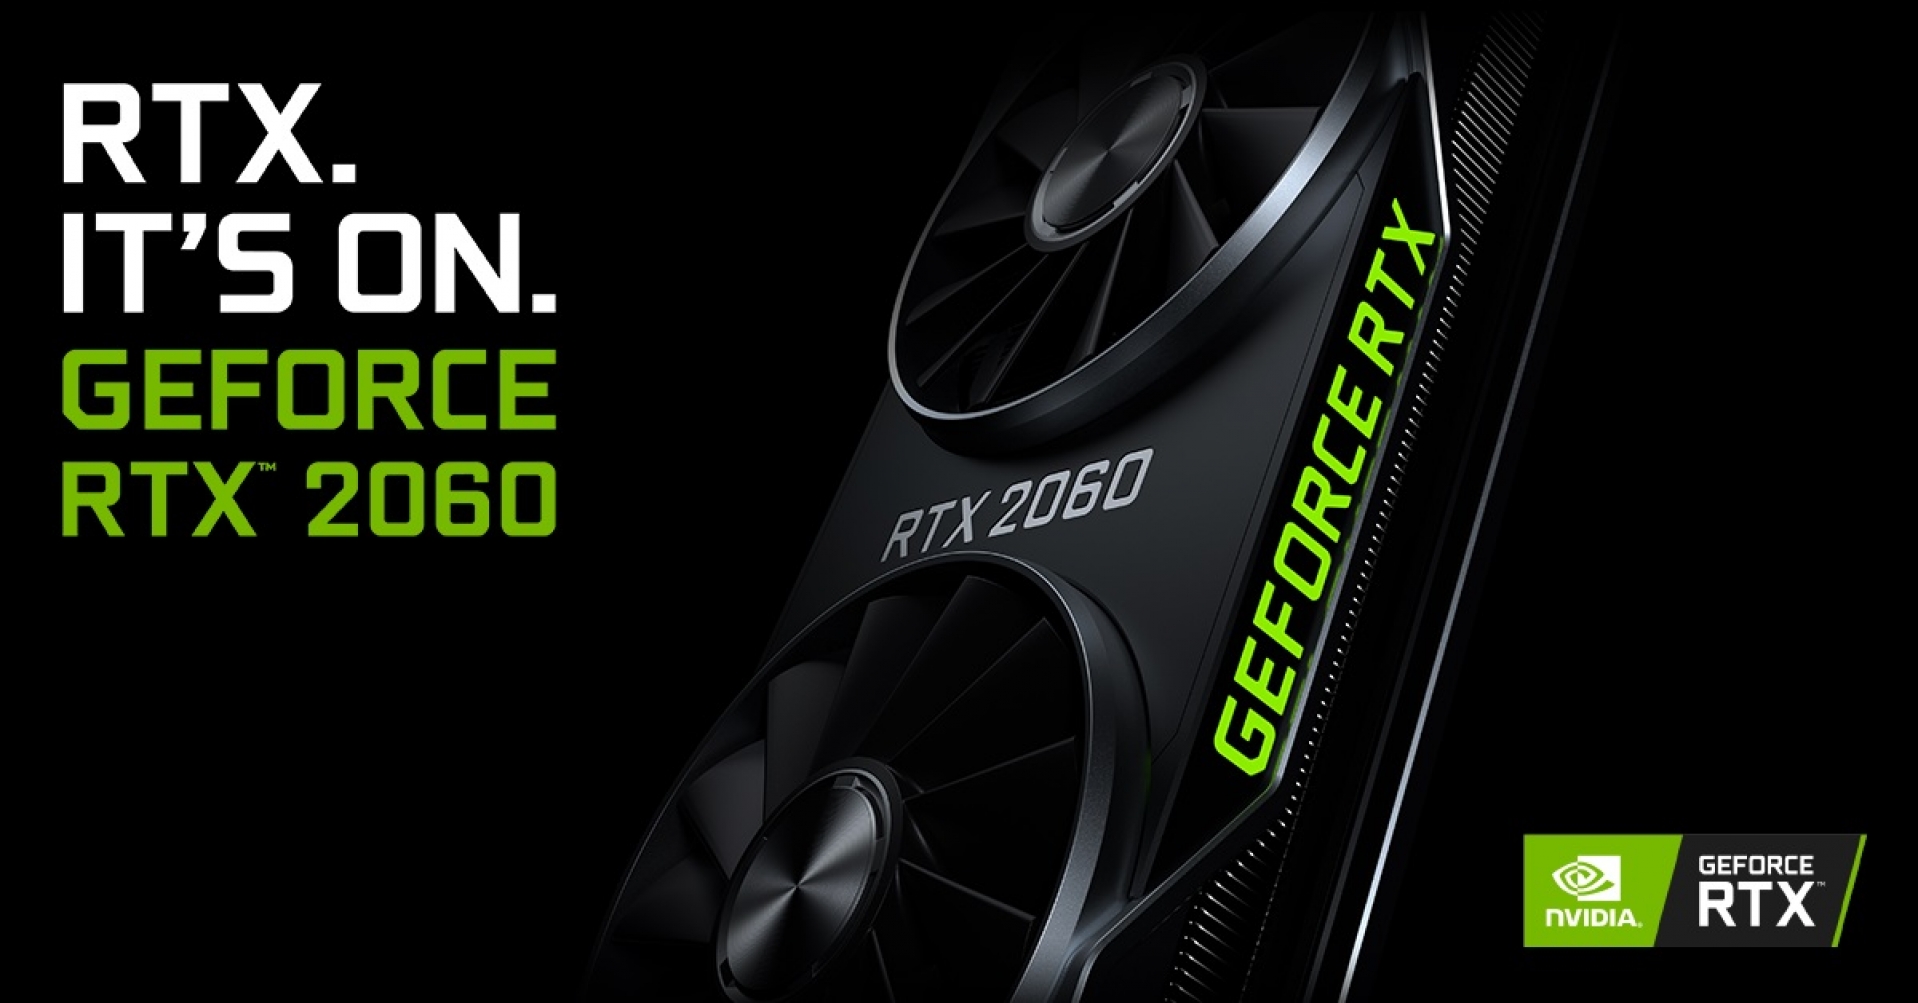 It’s On: NVIDIA Plans To Equip GeForce RTX 2060 With 8 GB Of Memory: Could Be Freeing Space For Ampere’s Release